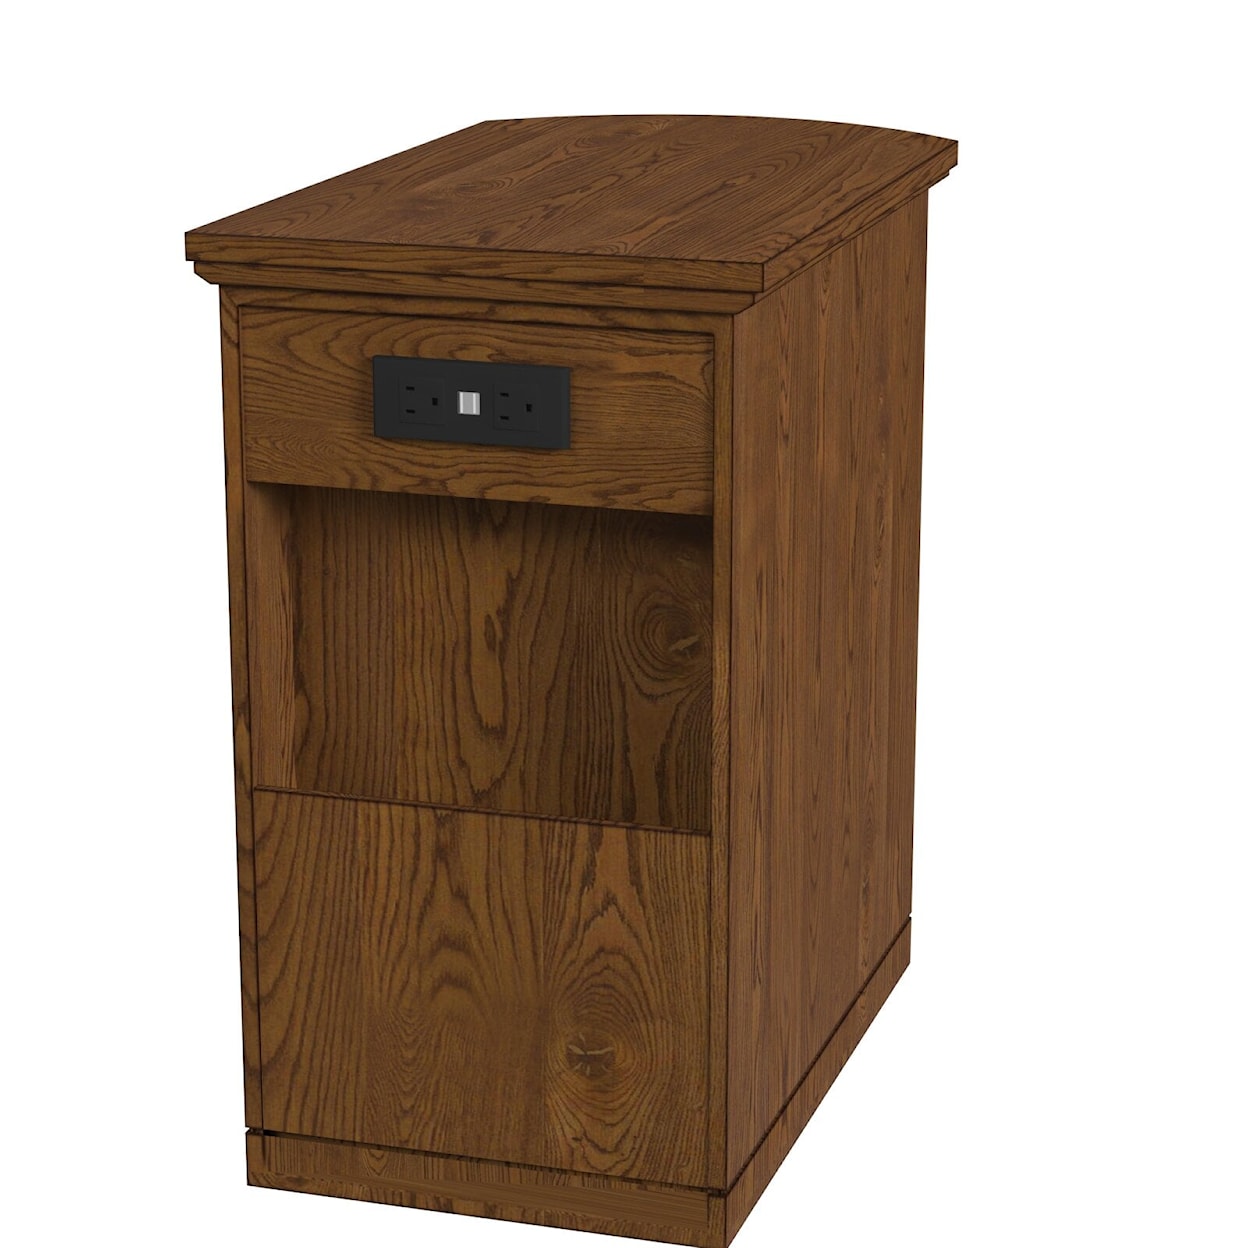 Null Furniture Newport Chairside Cabinet